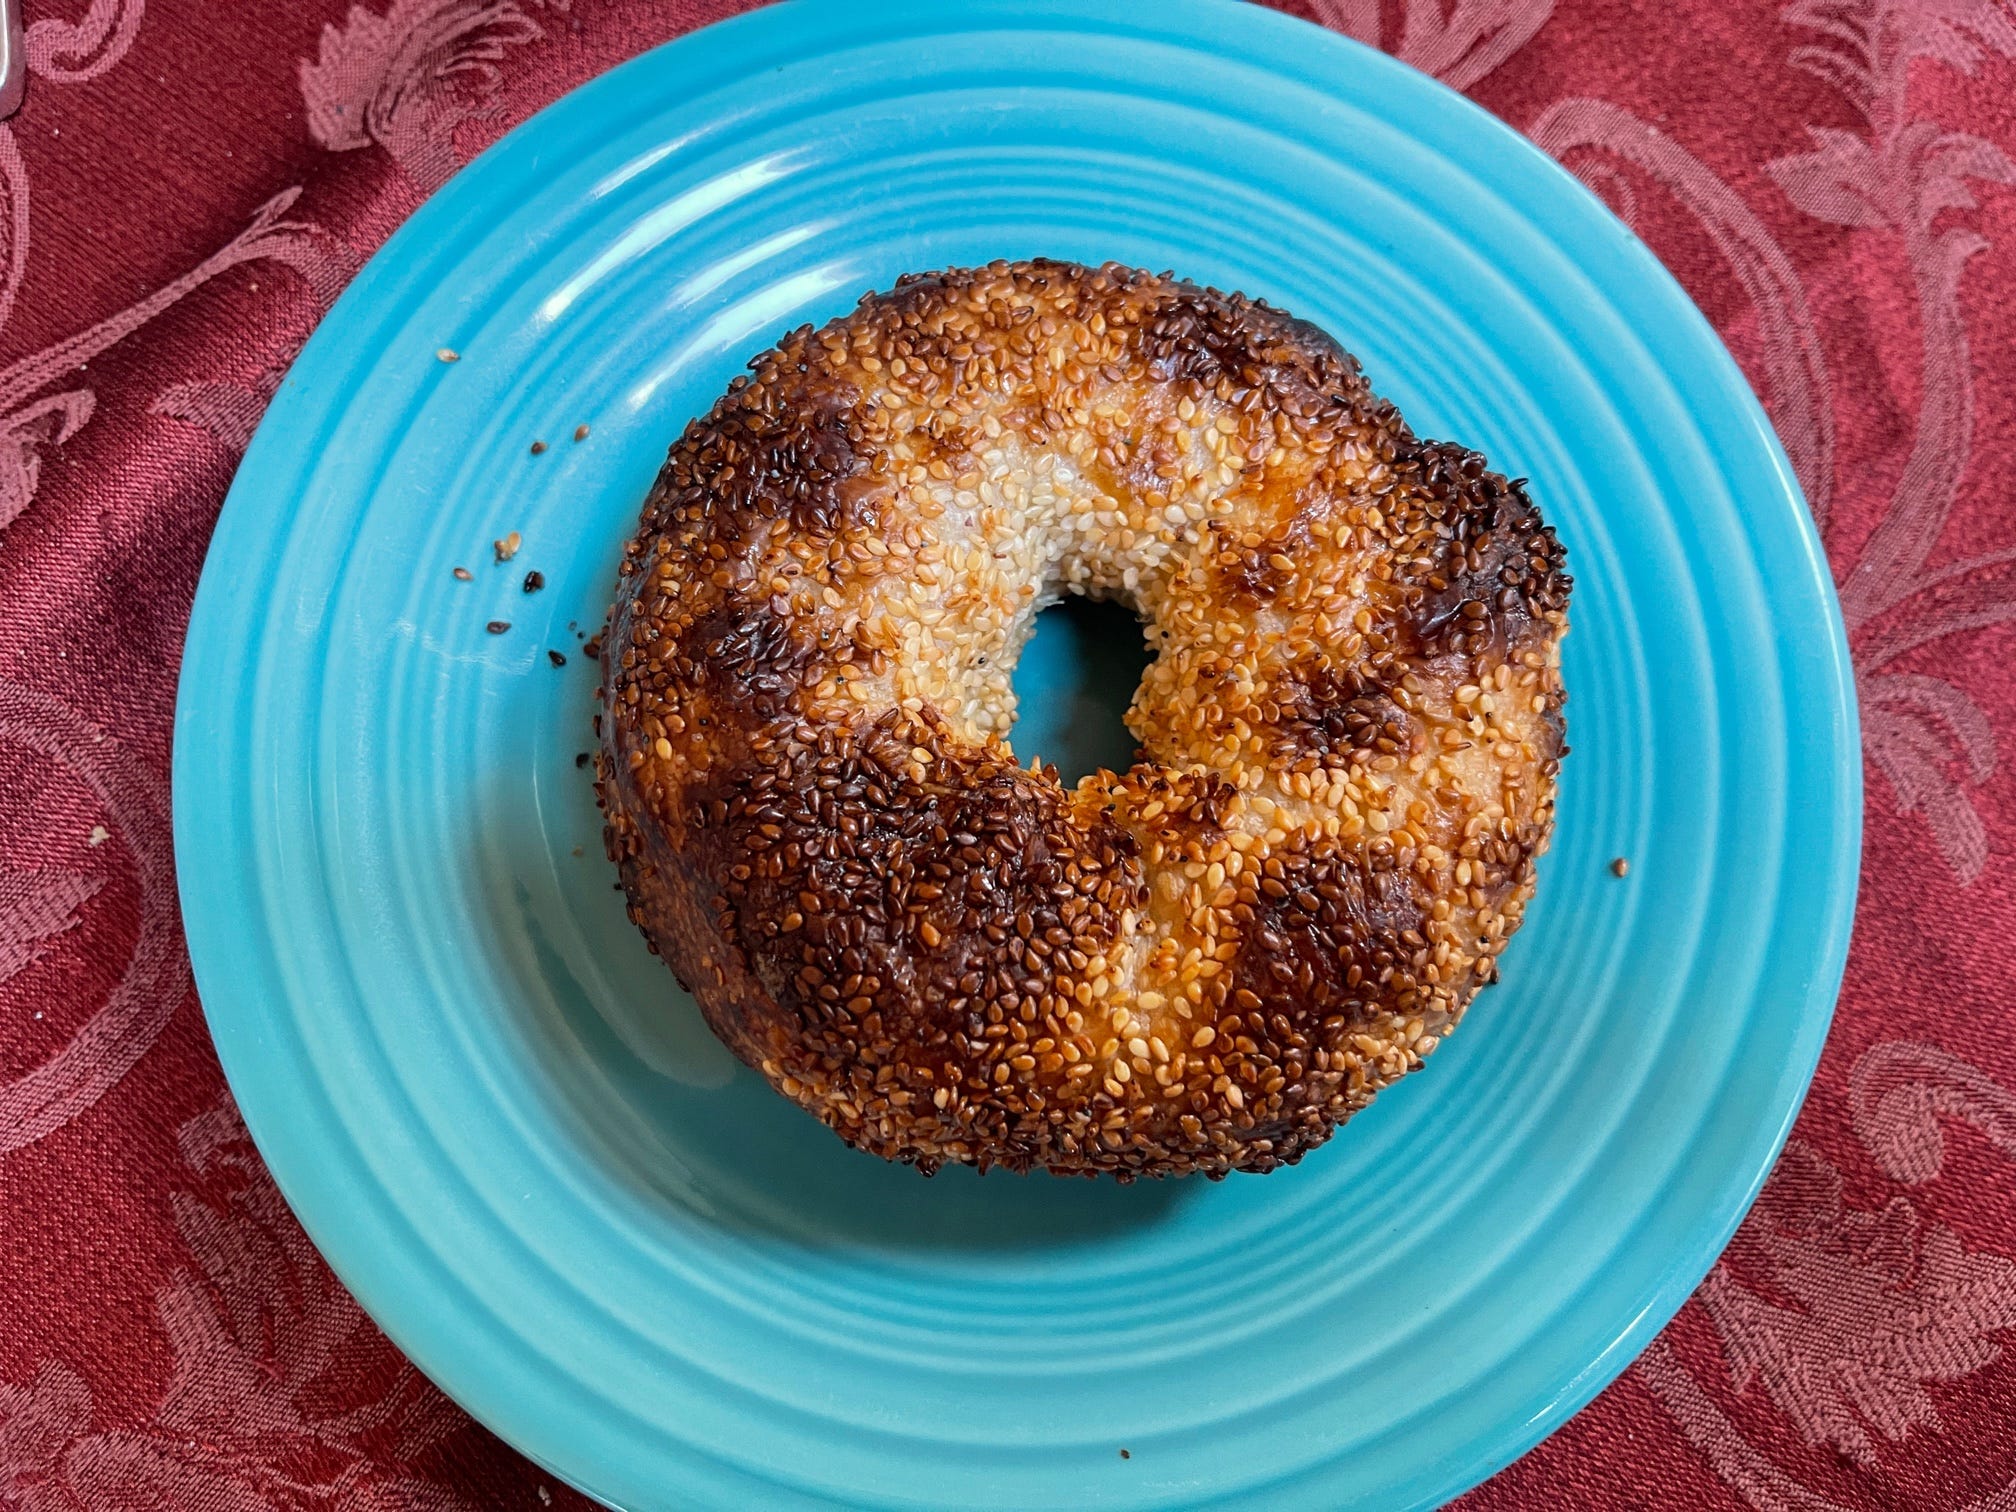 A bagel-makers secret: “You'll just keep rolling and rolling and